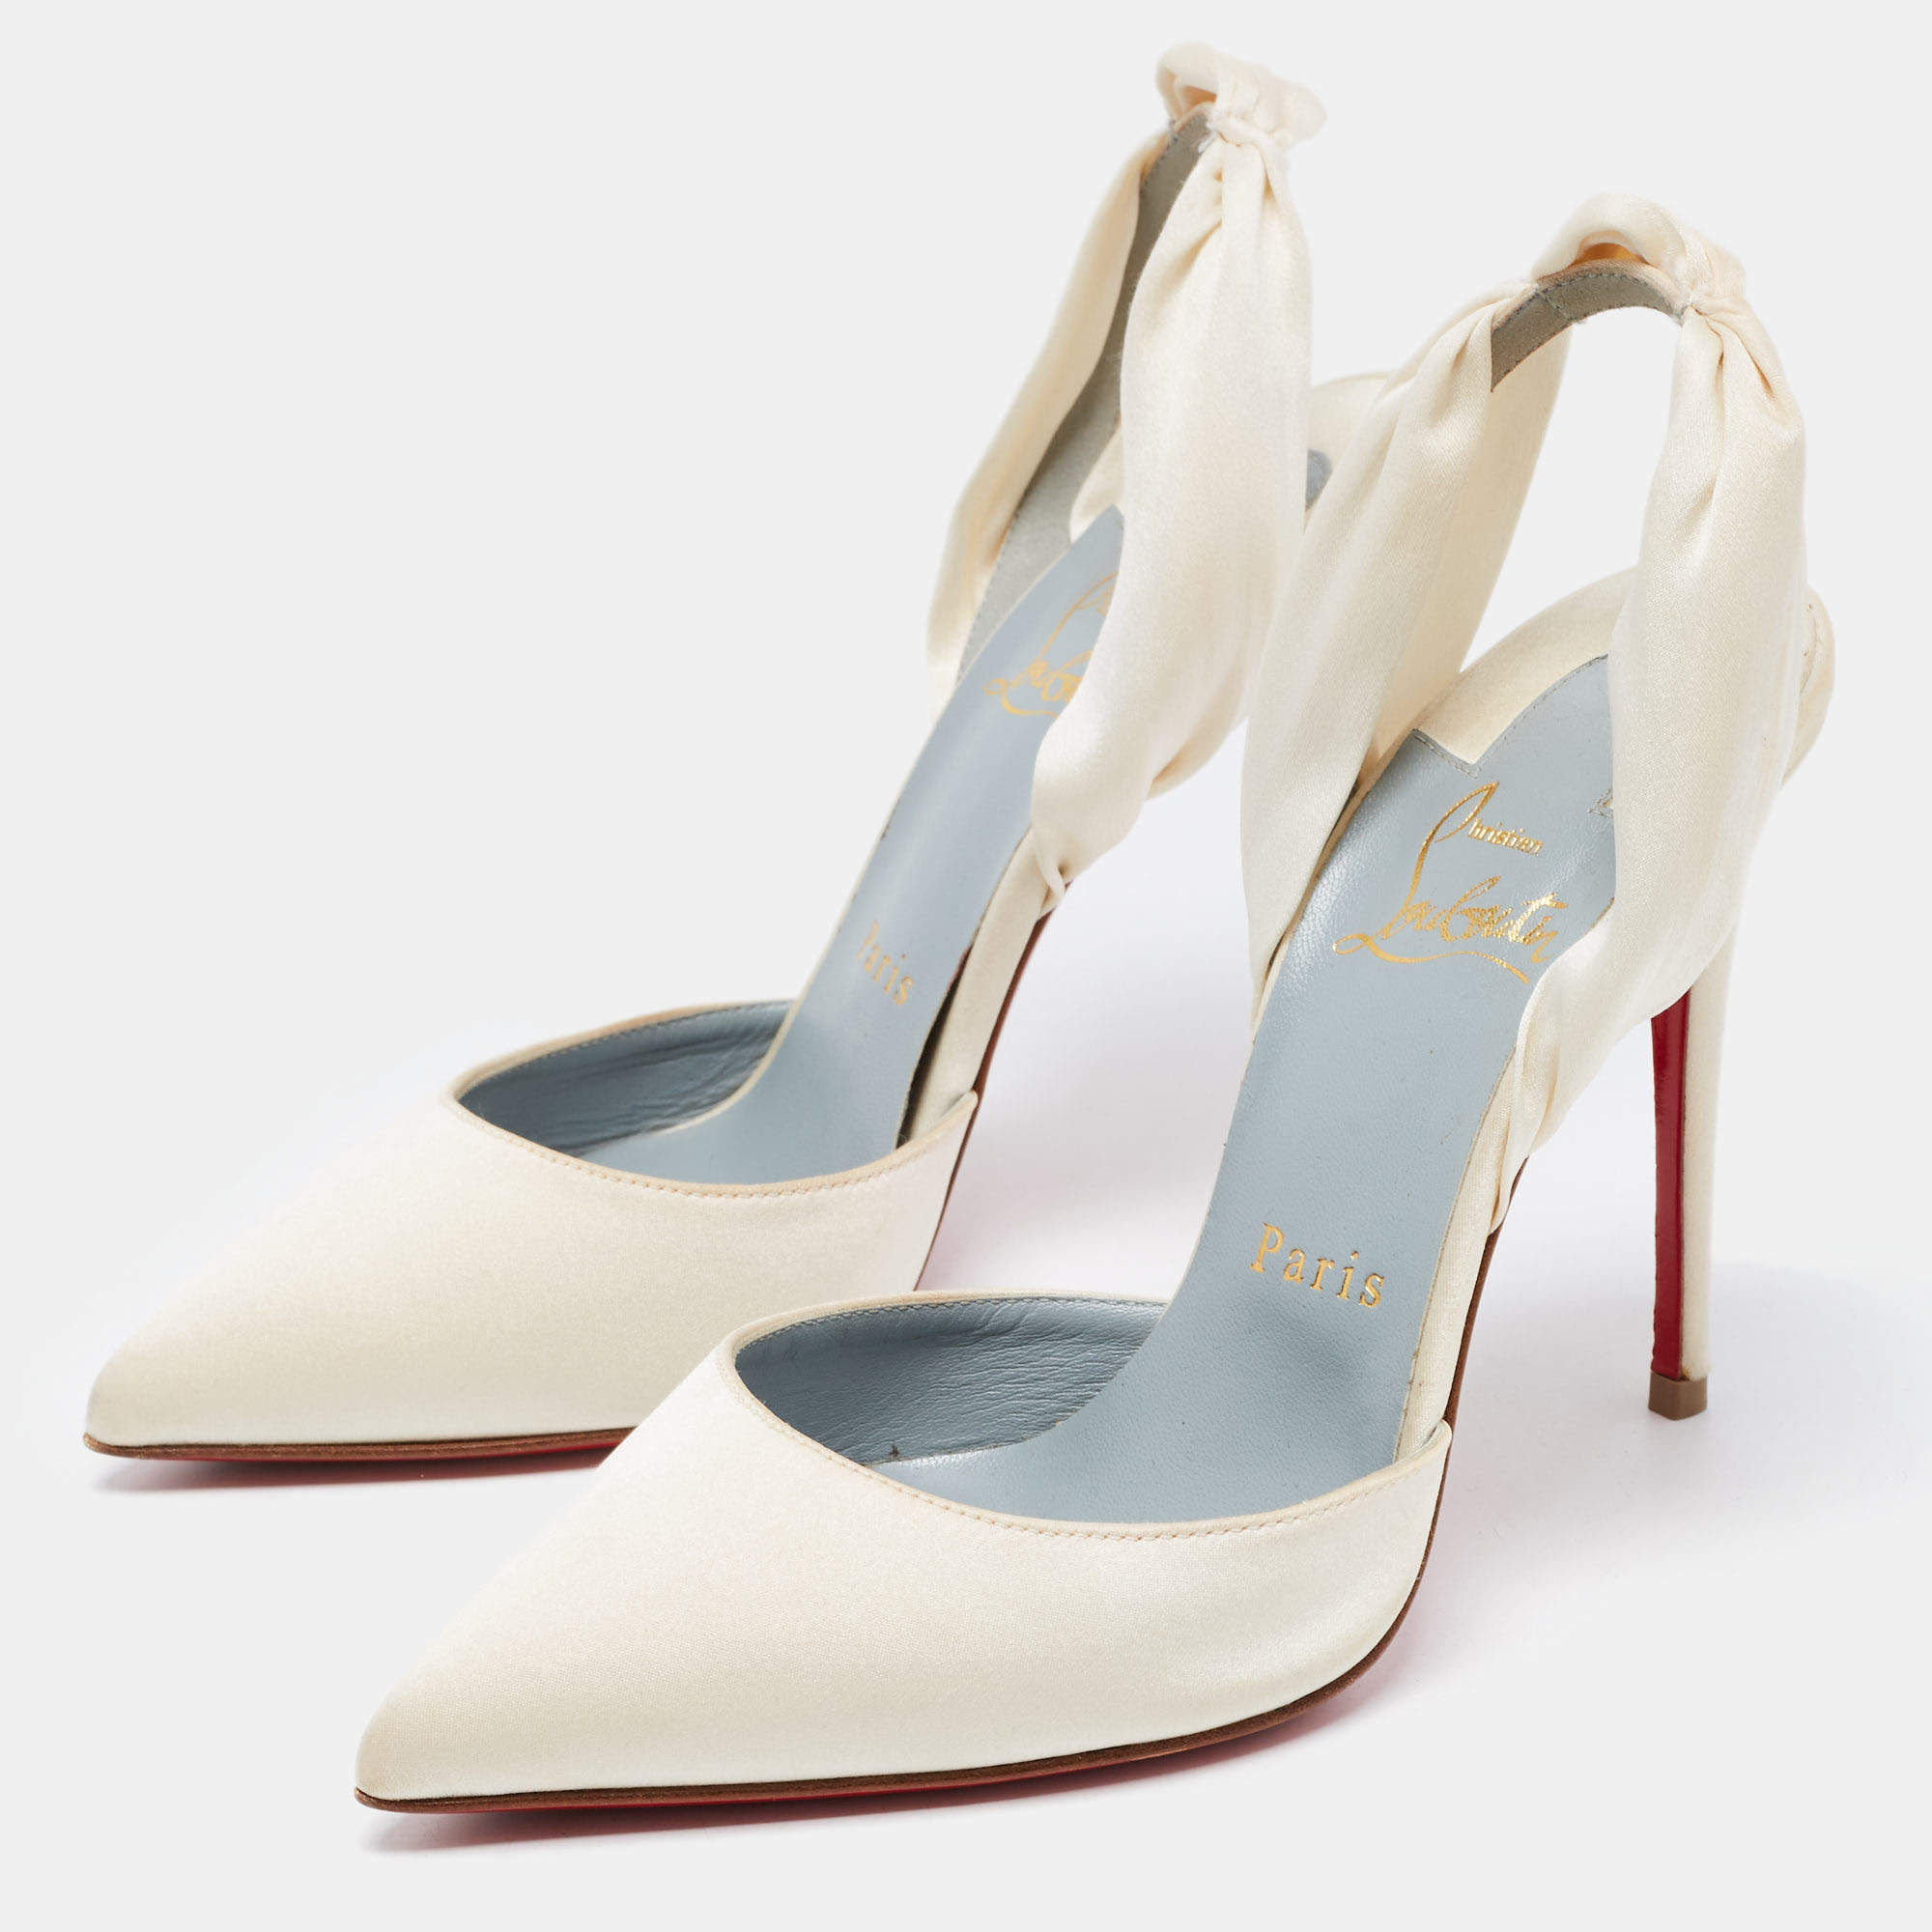 Christian Louboutin Shoes White Satin Frouprive 120mm Poof Sling-back  Pumps, New in Box WA001